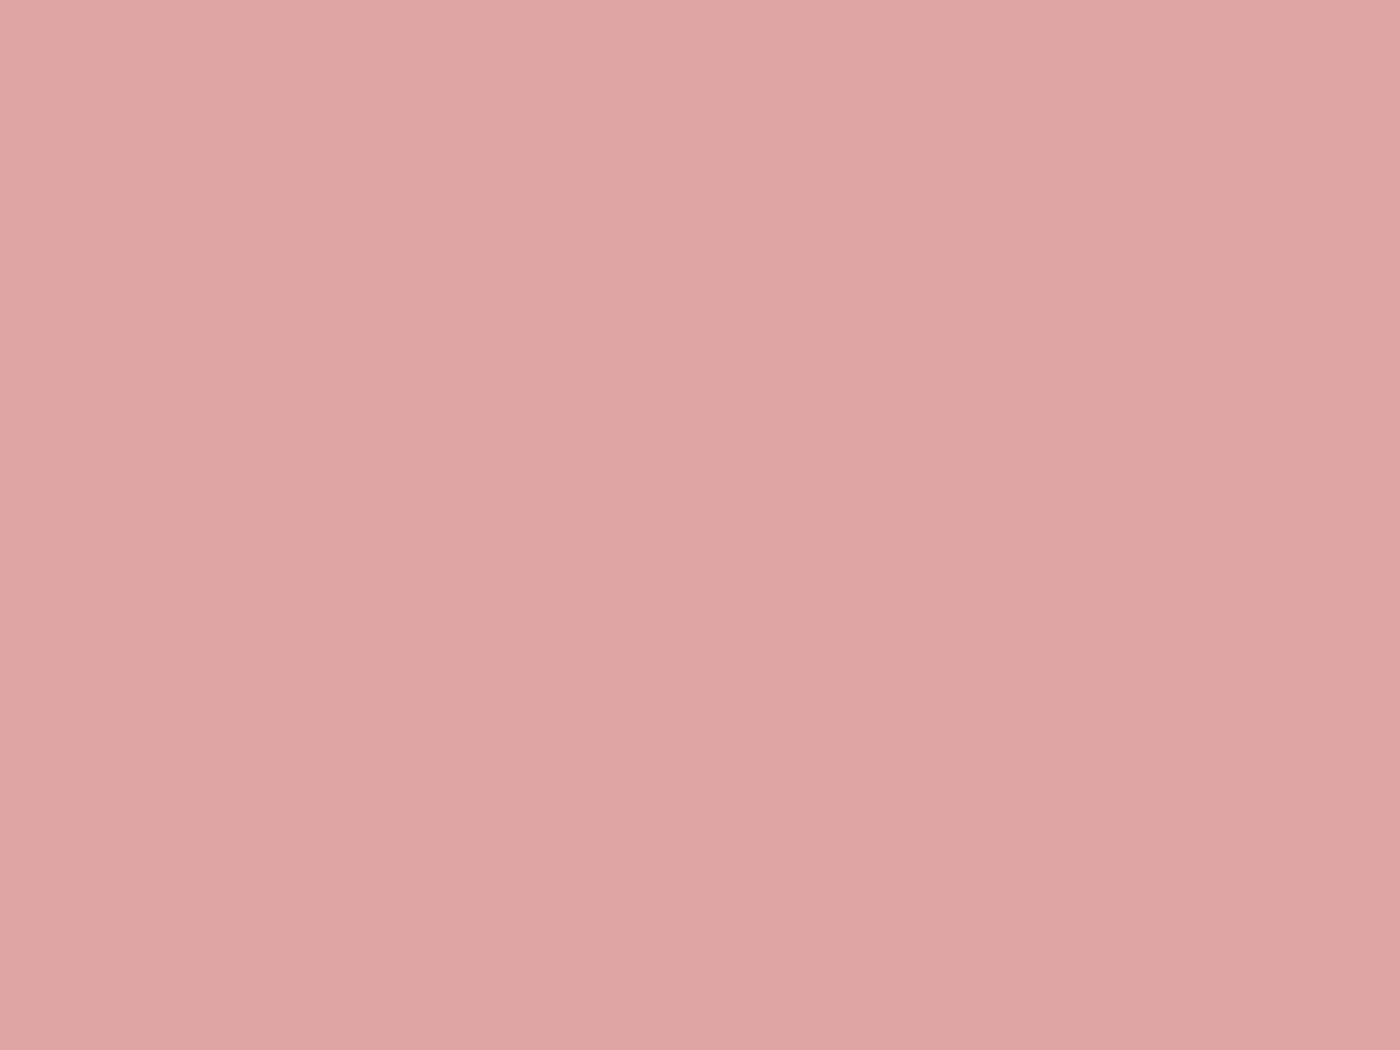 1400x1050 Pastel Pink Solid Color Background